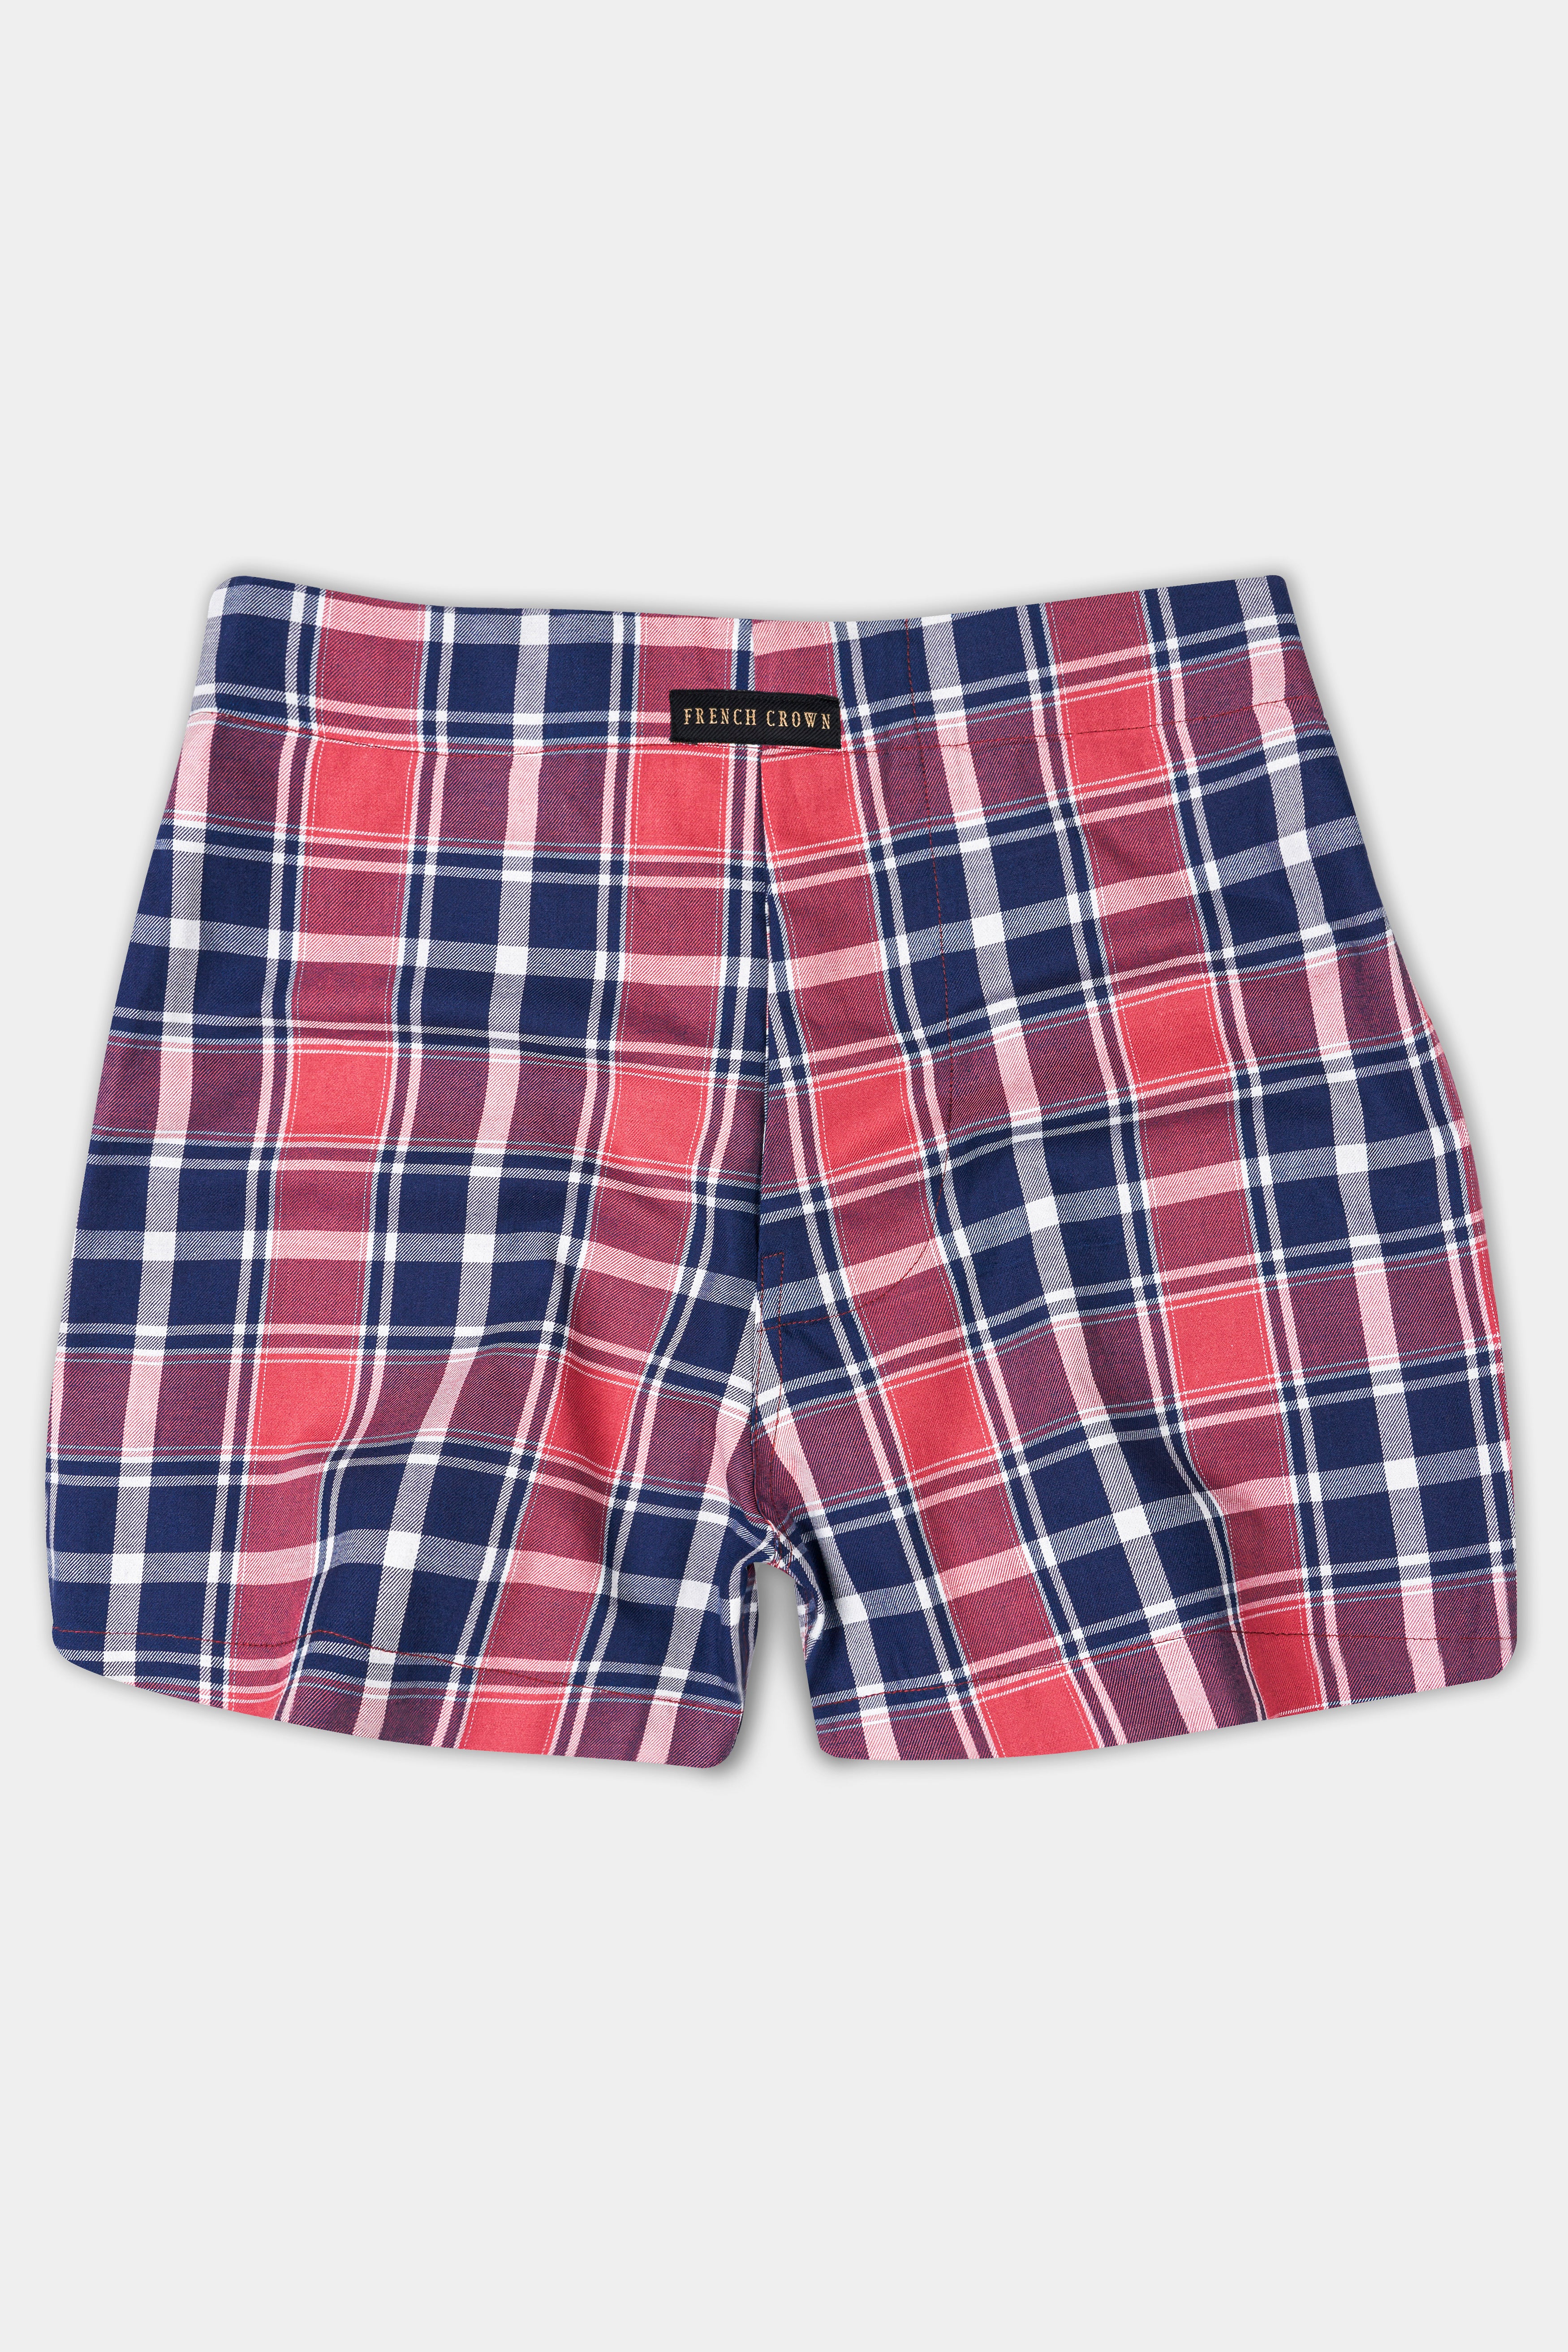 Coral Red And Admiral Blue With Rouge Pink Checkered Twill Premium Cotton Boxer BX541-28, BX541-30, BX541-32, BX541-34, BX541-36, BX541-38, BX541-40, BX541-42, BX541-44